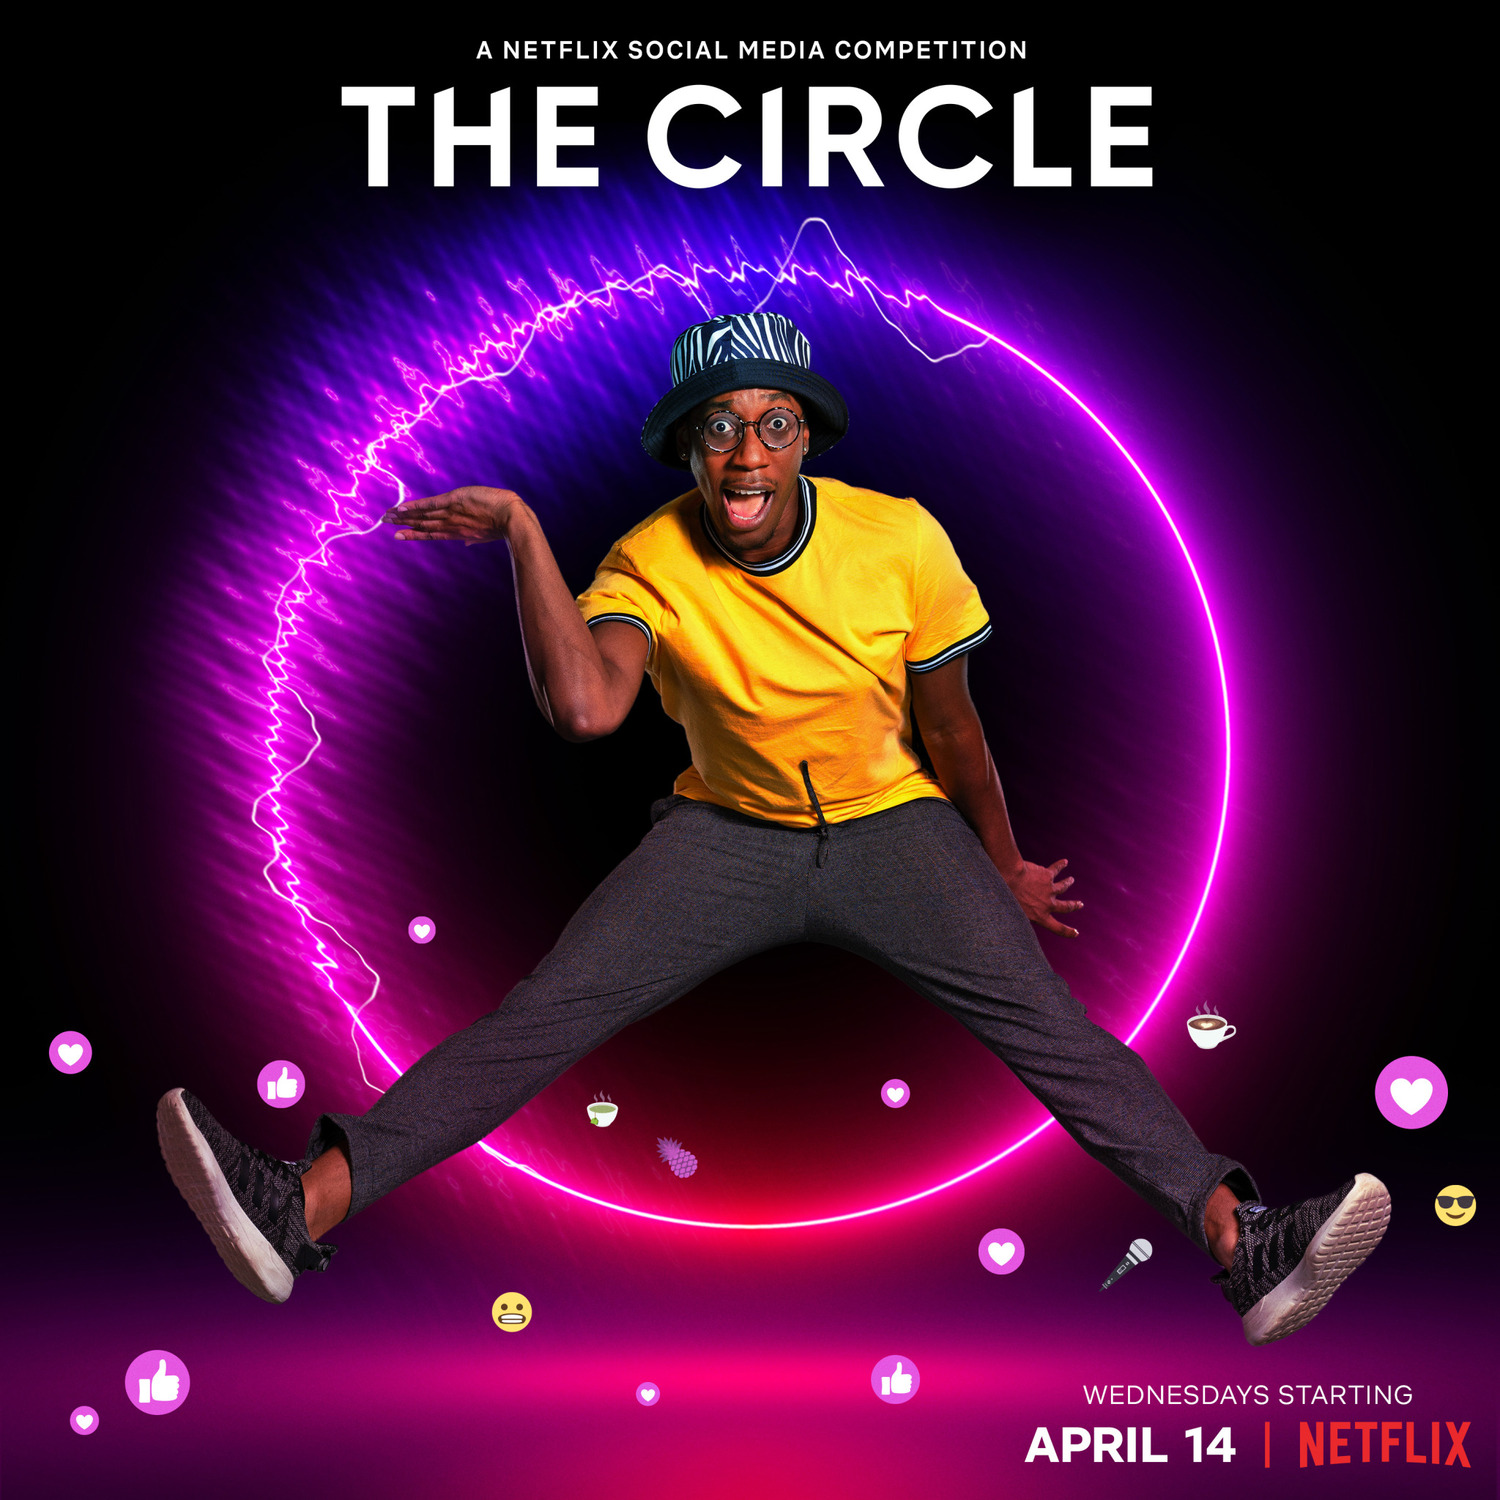 Extra Large TV Poster Image for The Circle (#8 of 20)